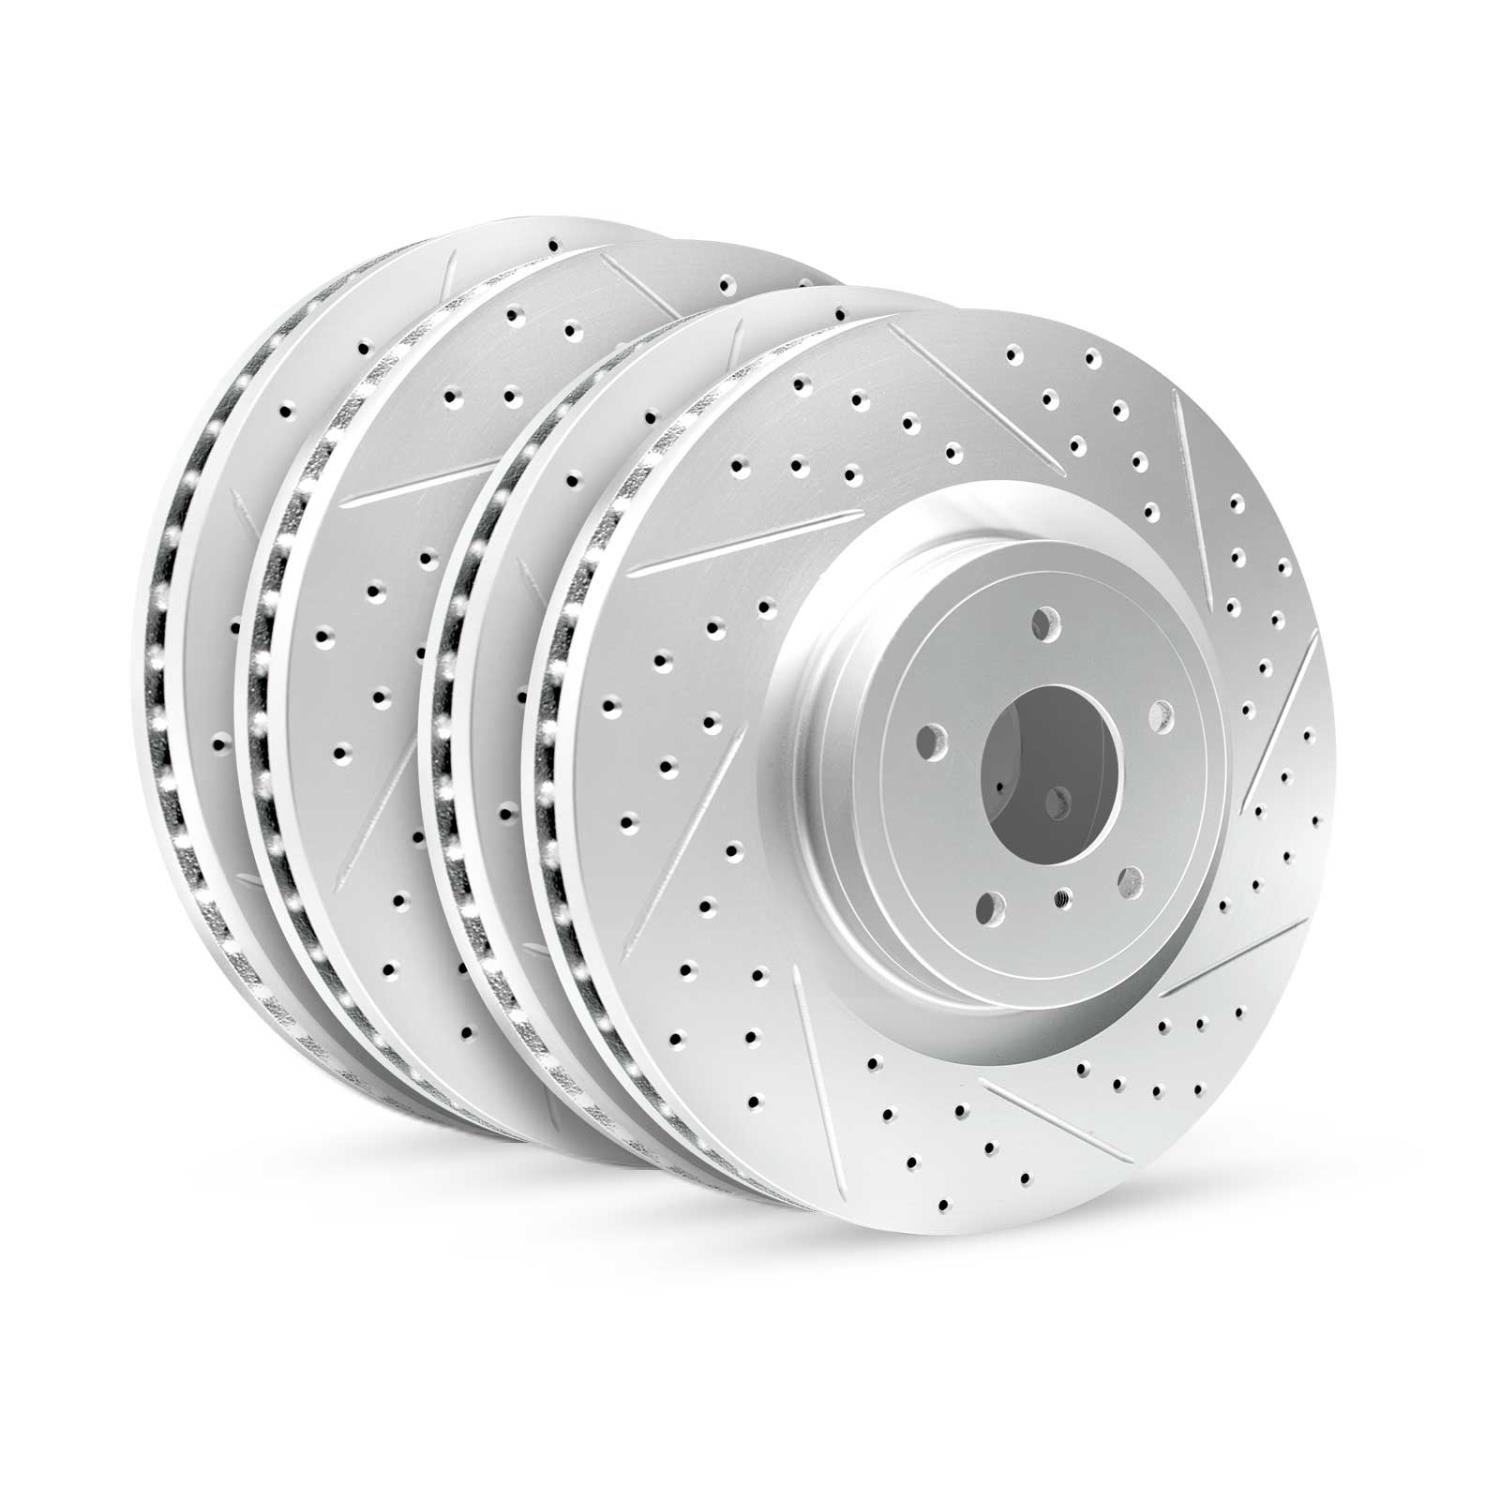 GEO-Carbon Drilled & Slotted Brake Rotor & Drum Set, 2004-2006 Lexus/Toyota/Scion, Position: Front & Rear